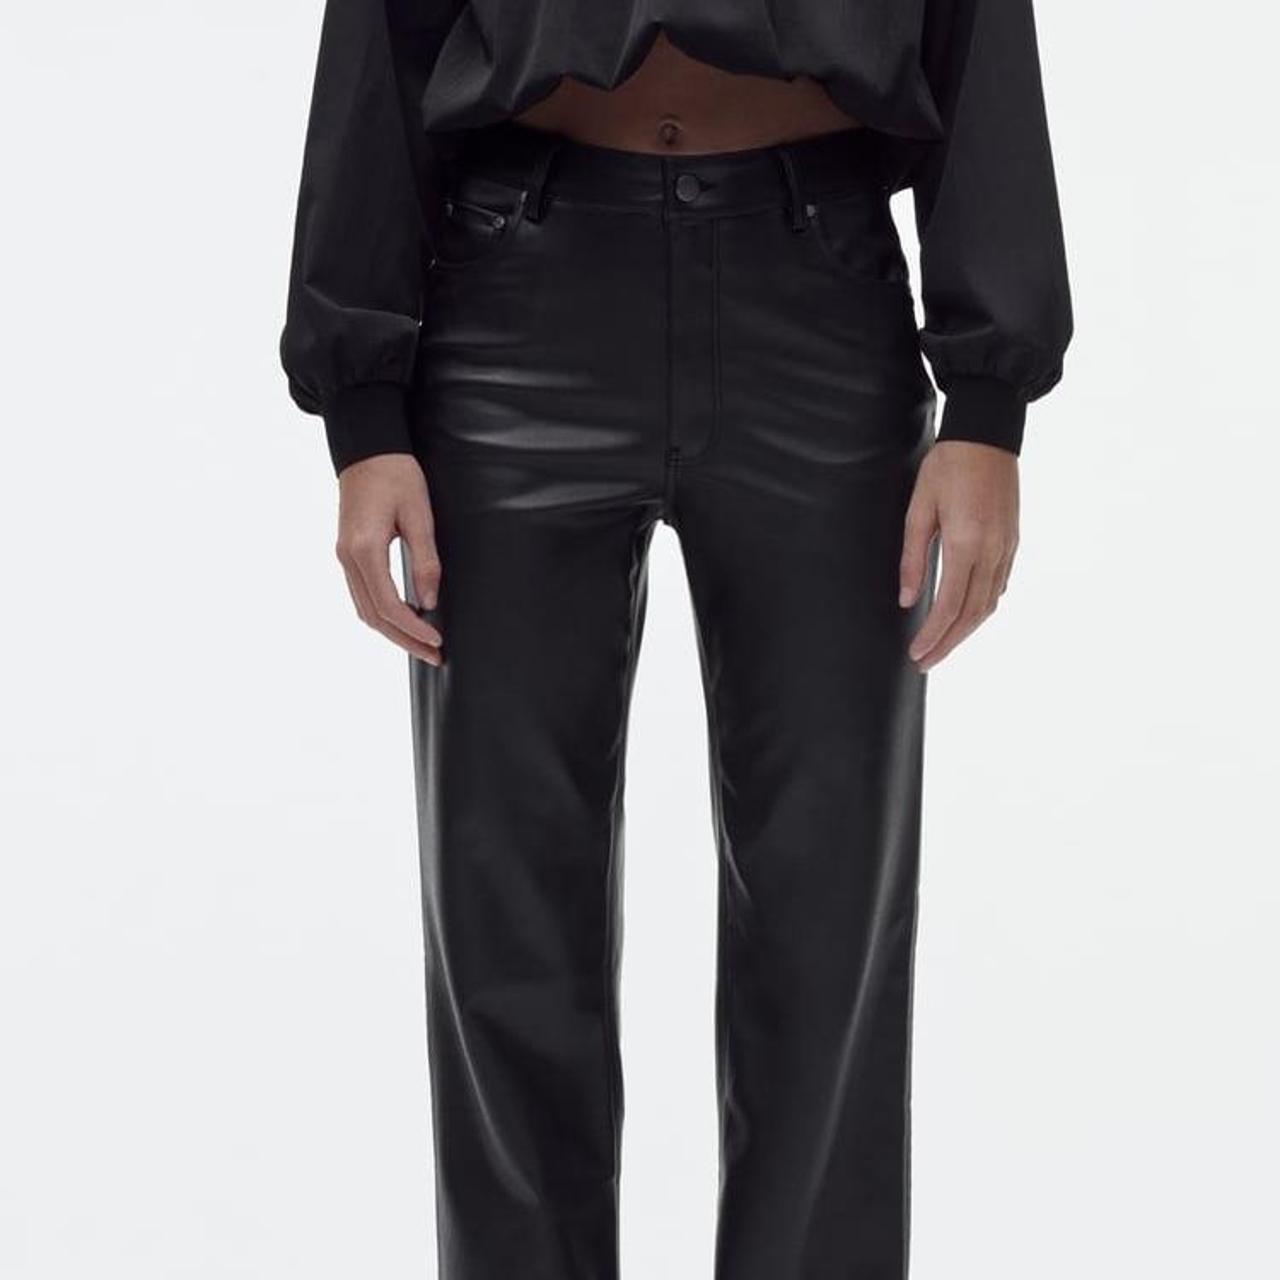 ZARA BNWT NEW HIGH-RISE FAUX LEATHER TROUSERS ALL SIZES REF. BLACK |  4387/298